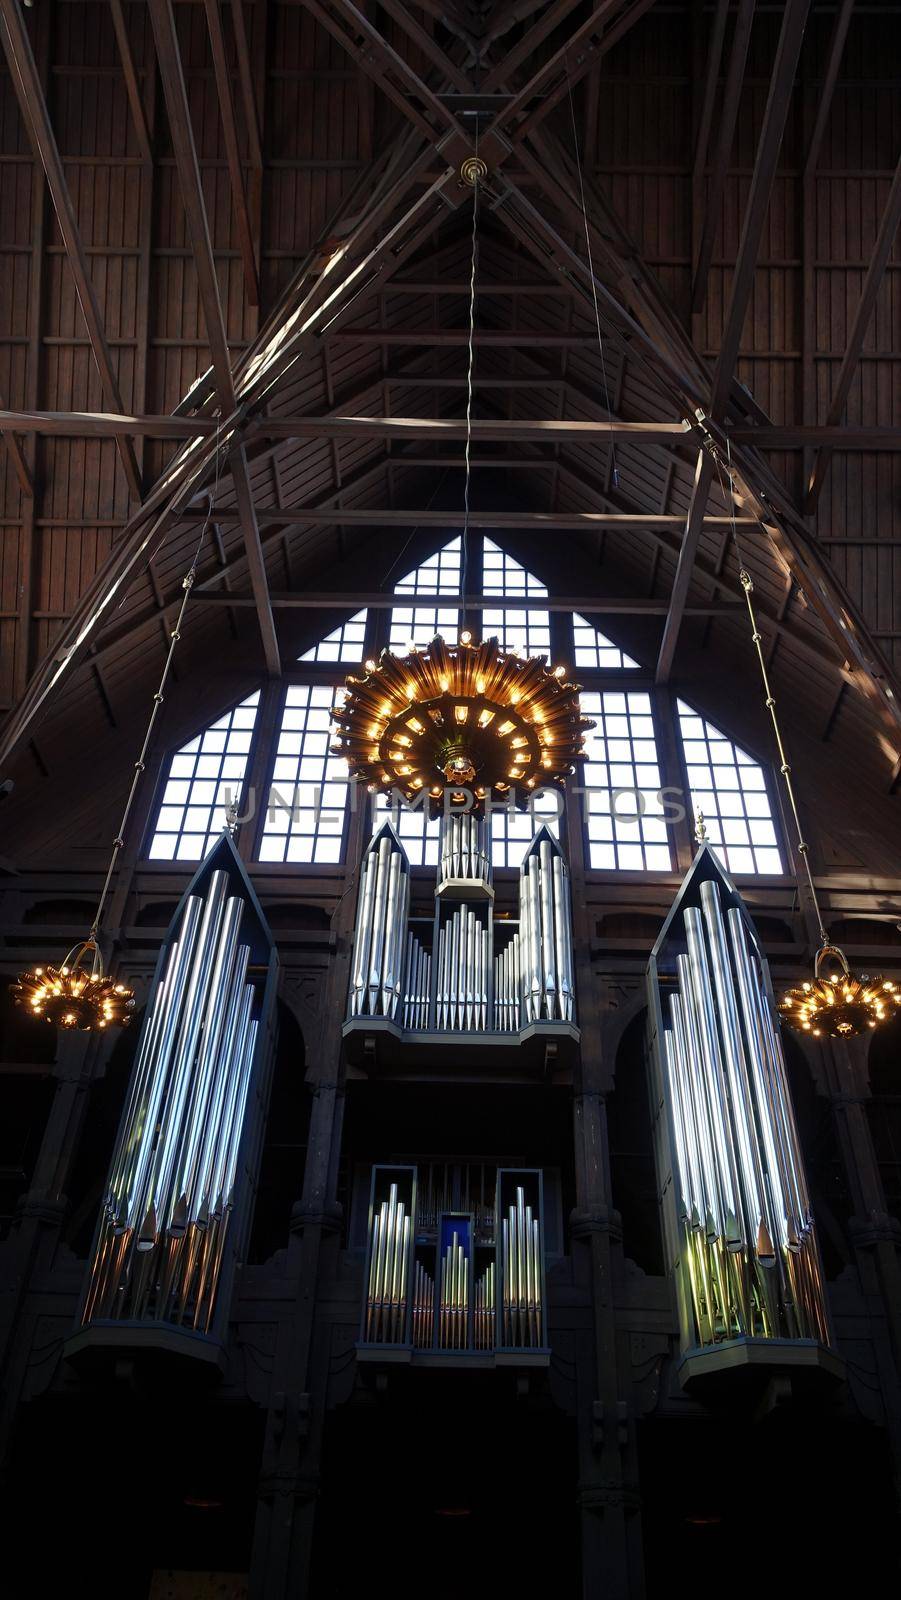 Pipe organ of a church in a small town in northern Sweden